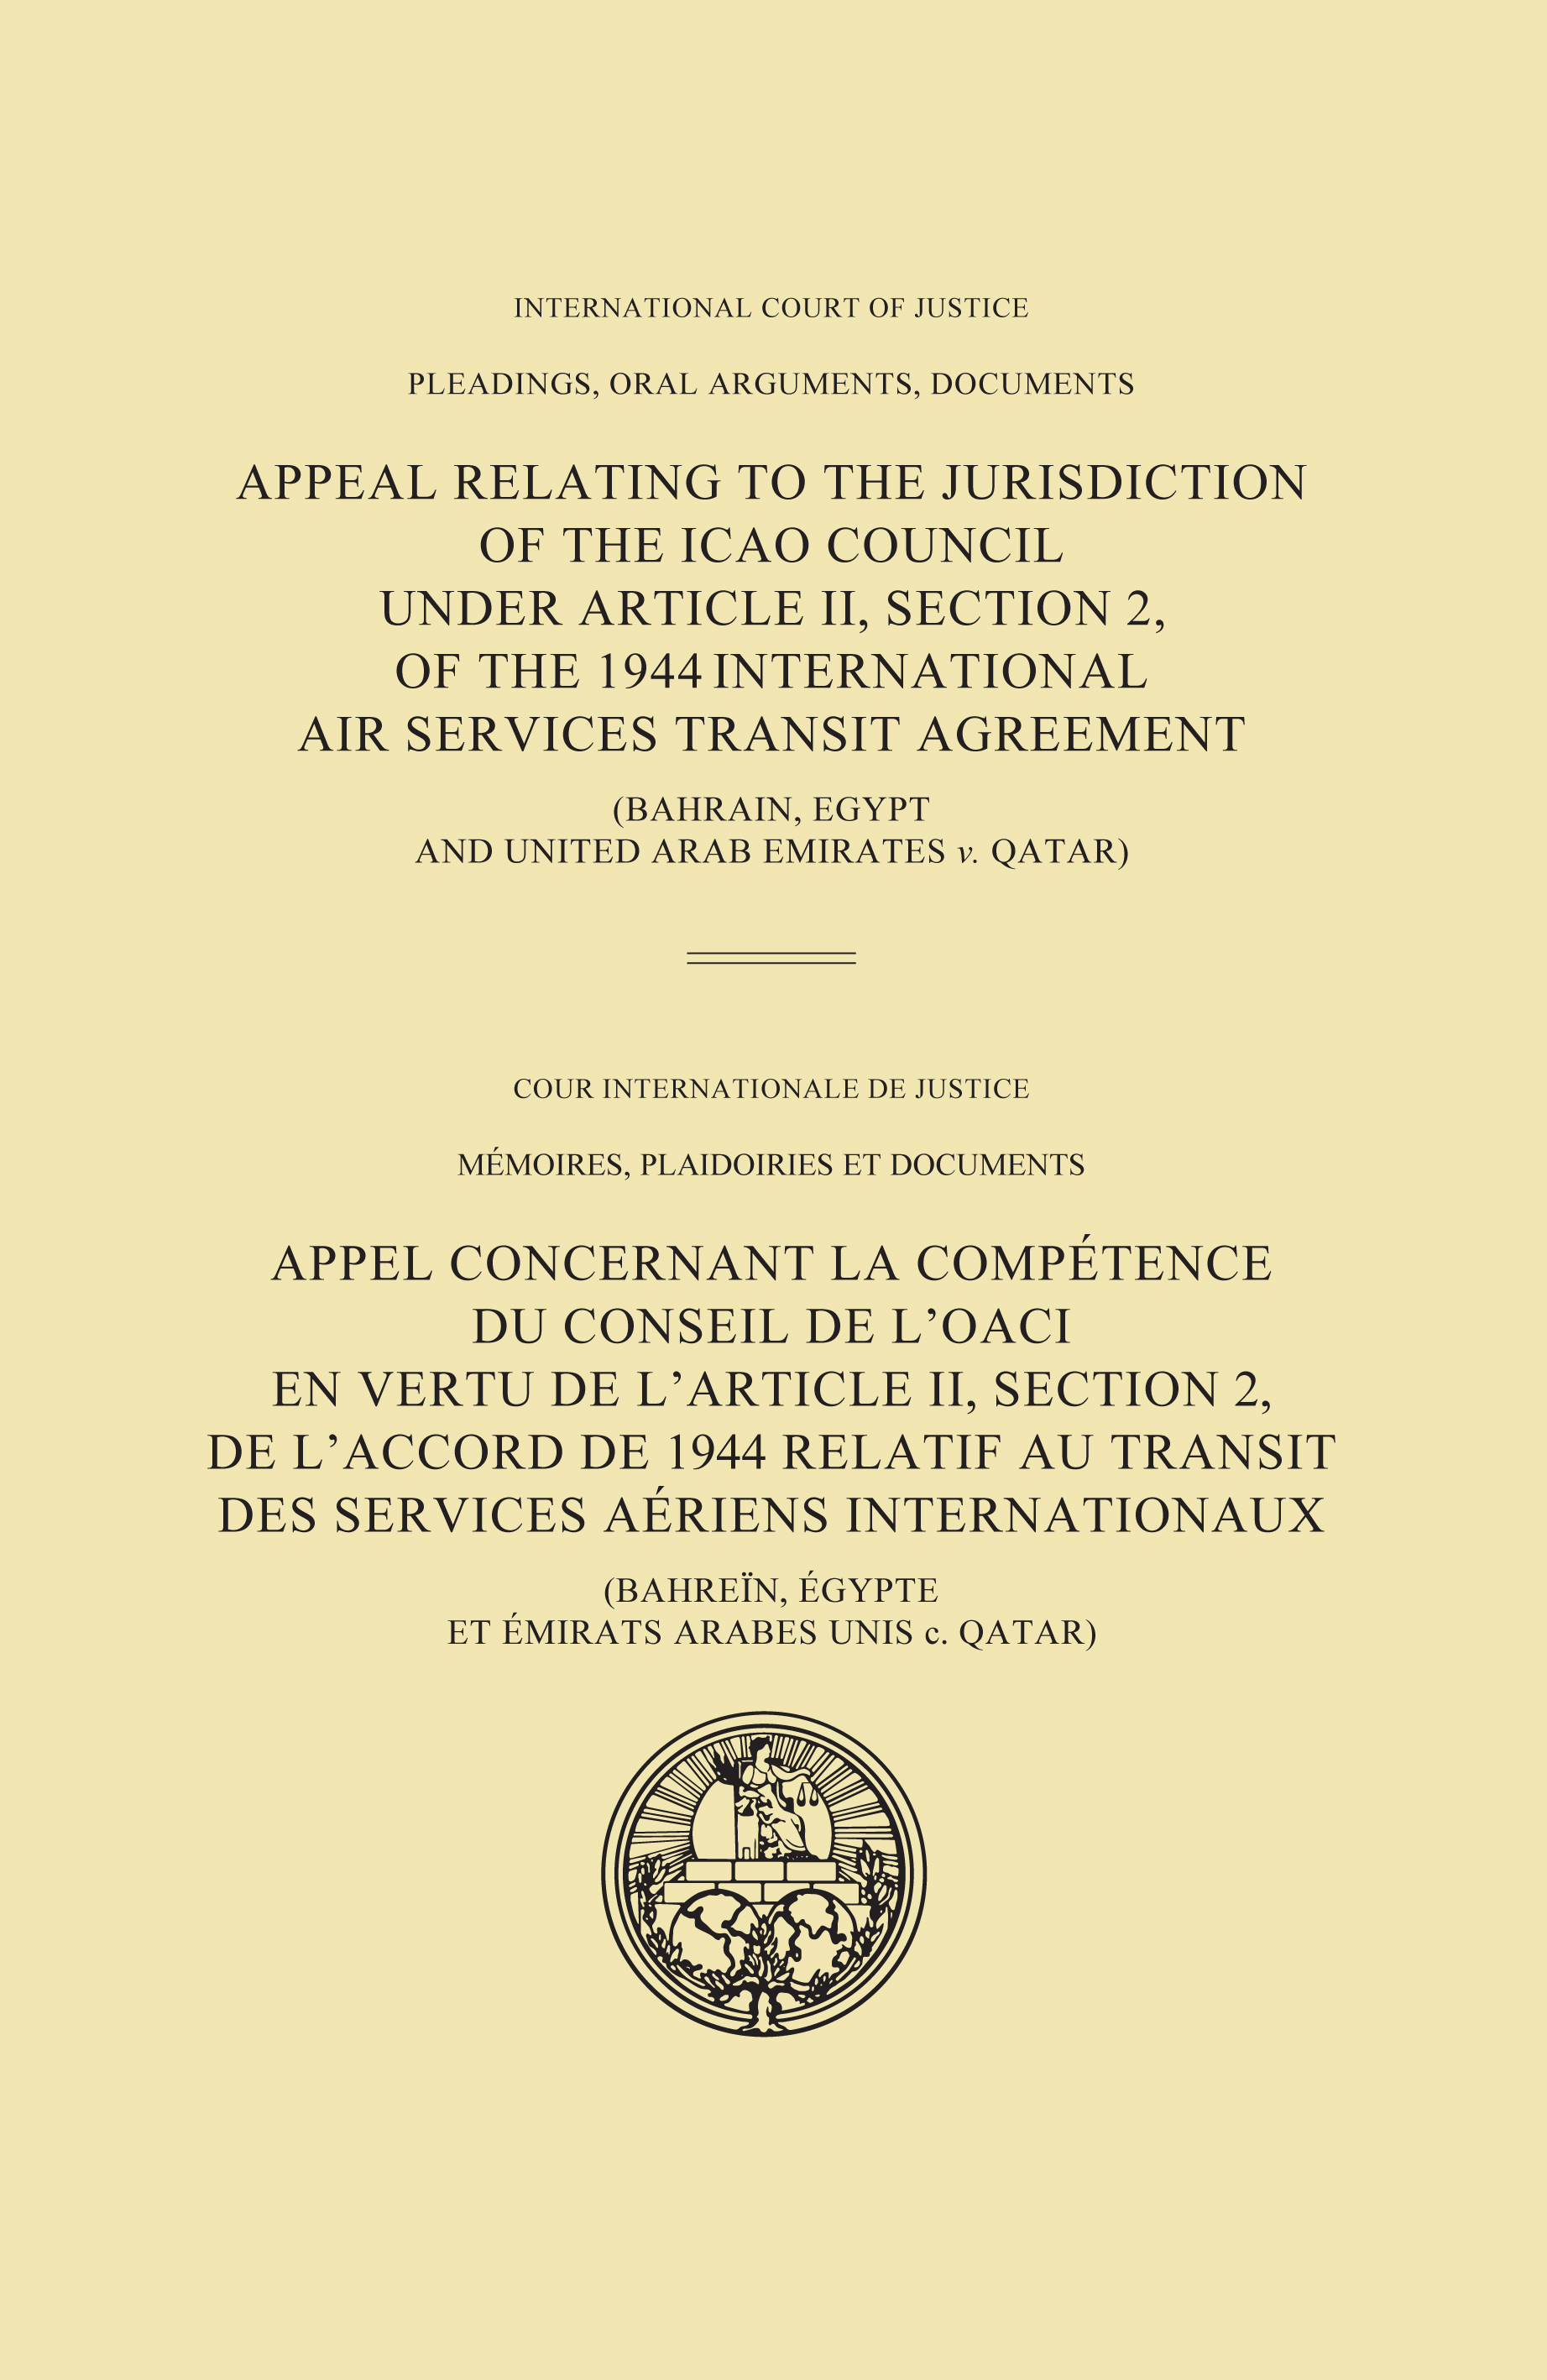 image of Appeal Relating to the Jurisdiction of the ICAO Council under Article II, Section 2, of the 1944 International Air Services Transit Agreement (Bahrain, Egypt and United Arab Emirates v. Qatar)